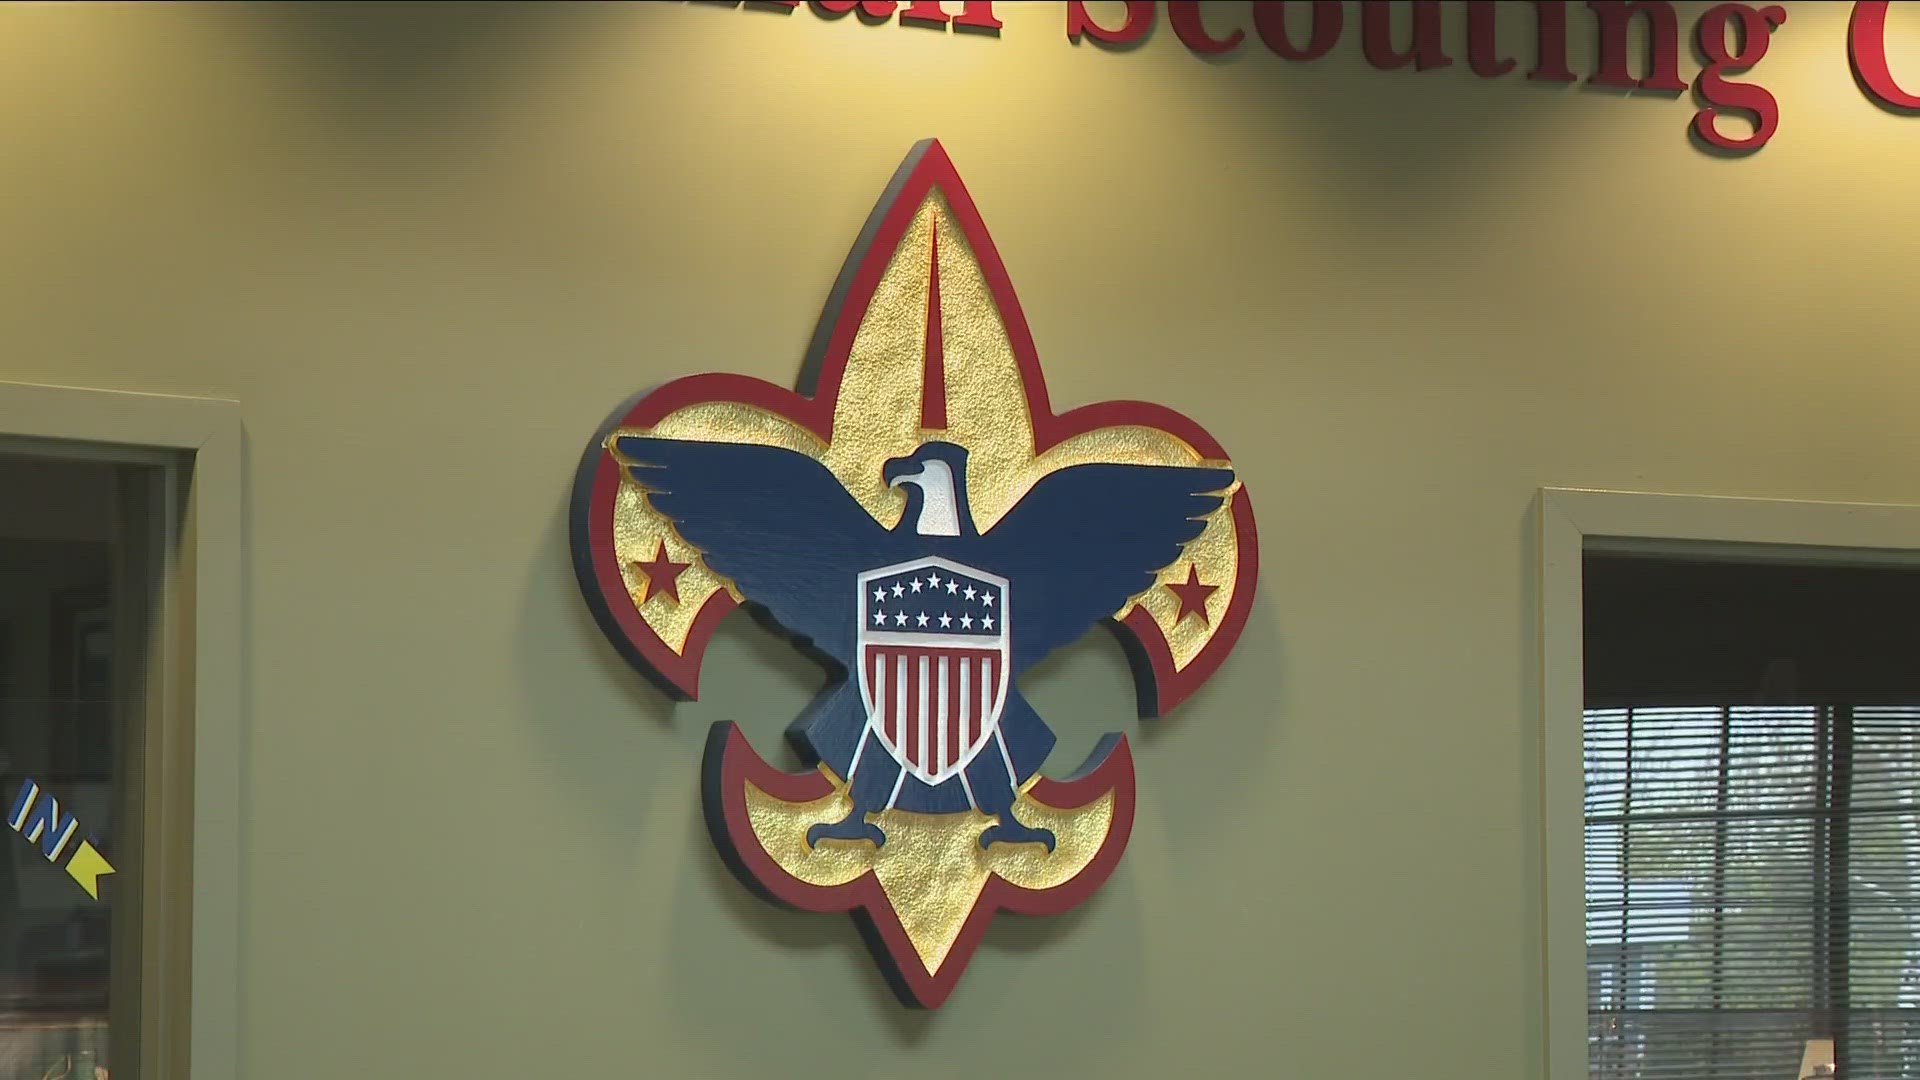 Boy Scouts Councils in WNY looking to merge